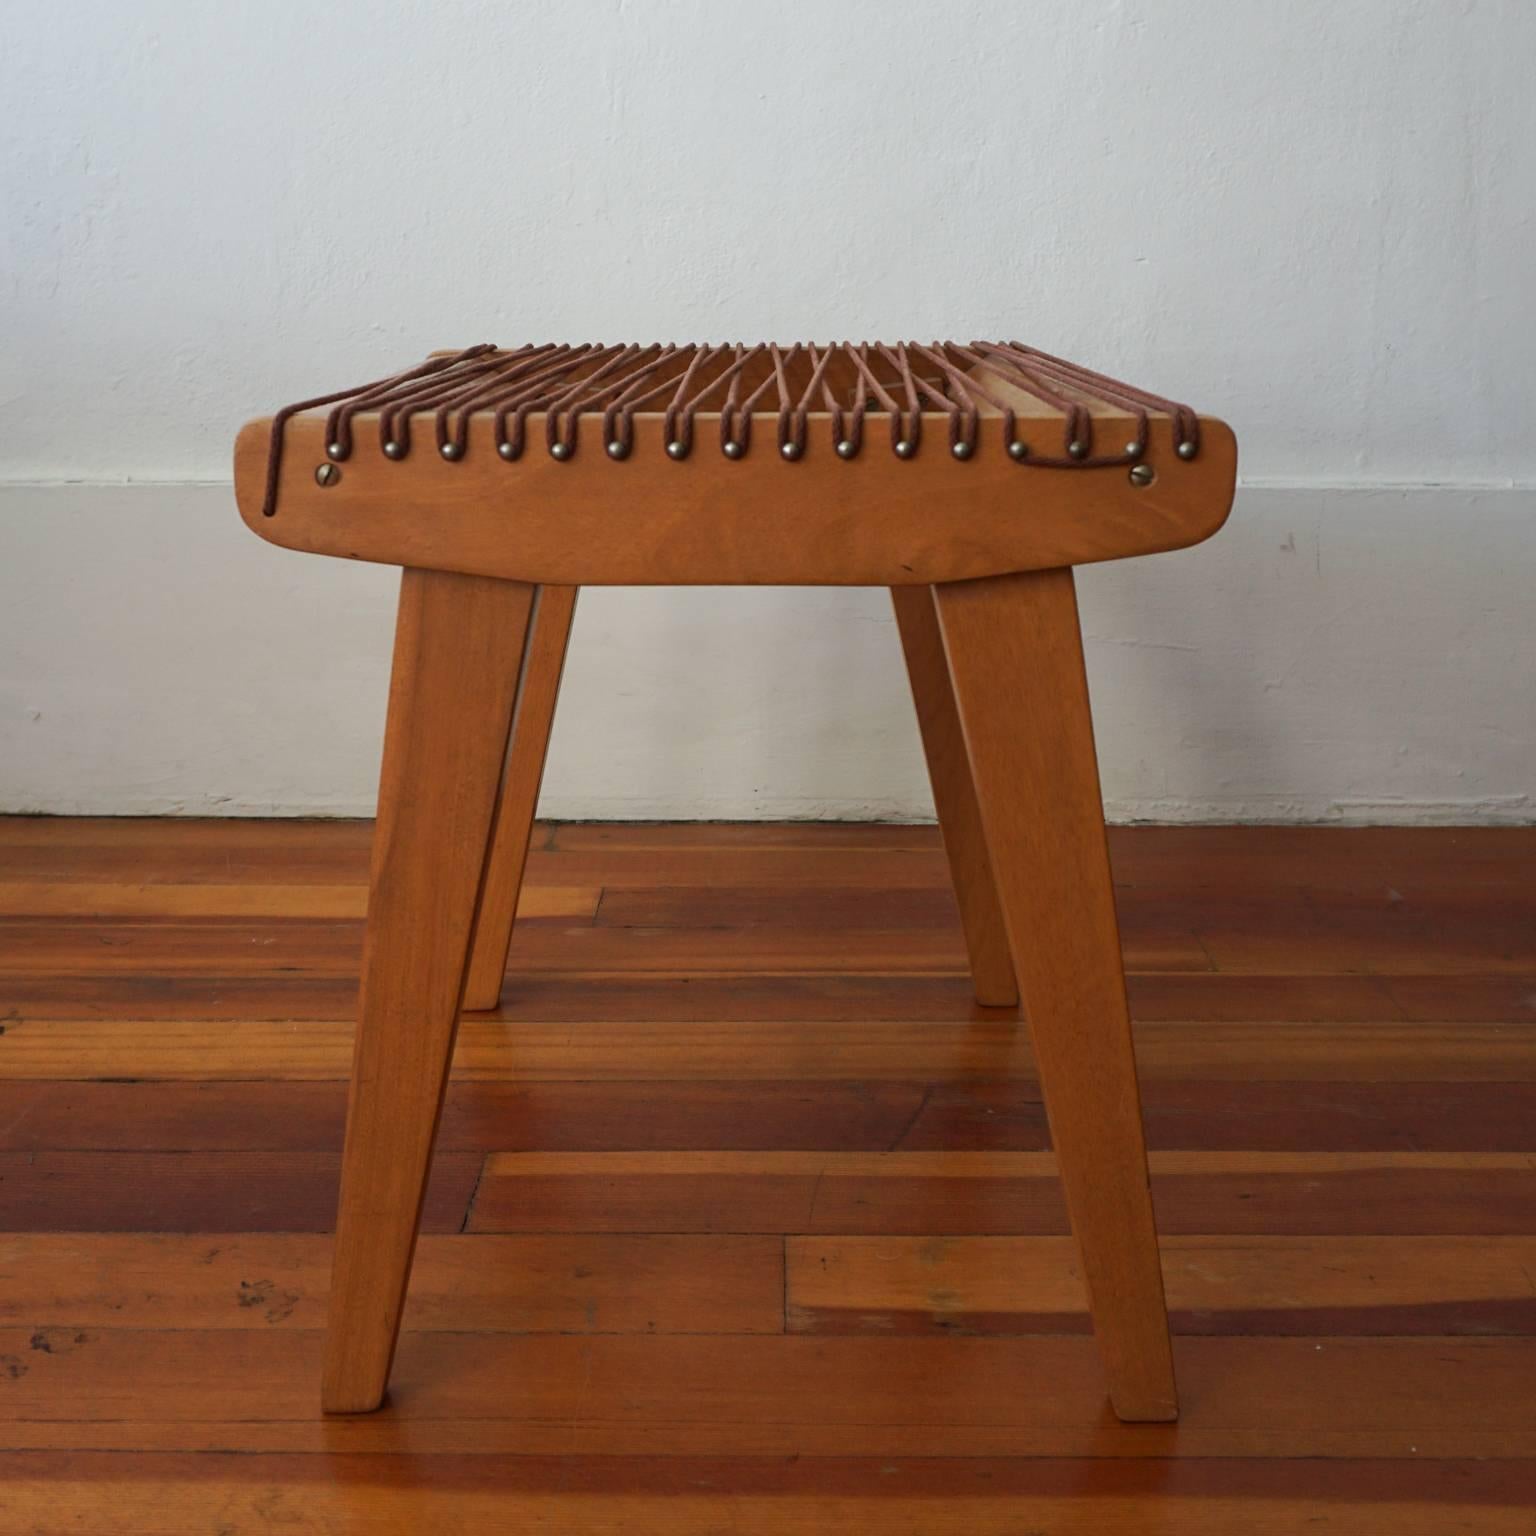 Wood and string stool by Robert J Ellenberger for Calfab Furniture Company, Los Angeles California. This design was selected for the MoMA good design exhibition in 1950. It was shown next to a VKG chair. Original string and finish.